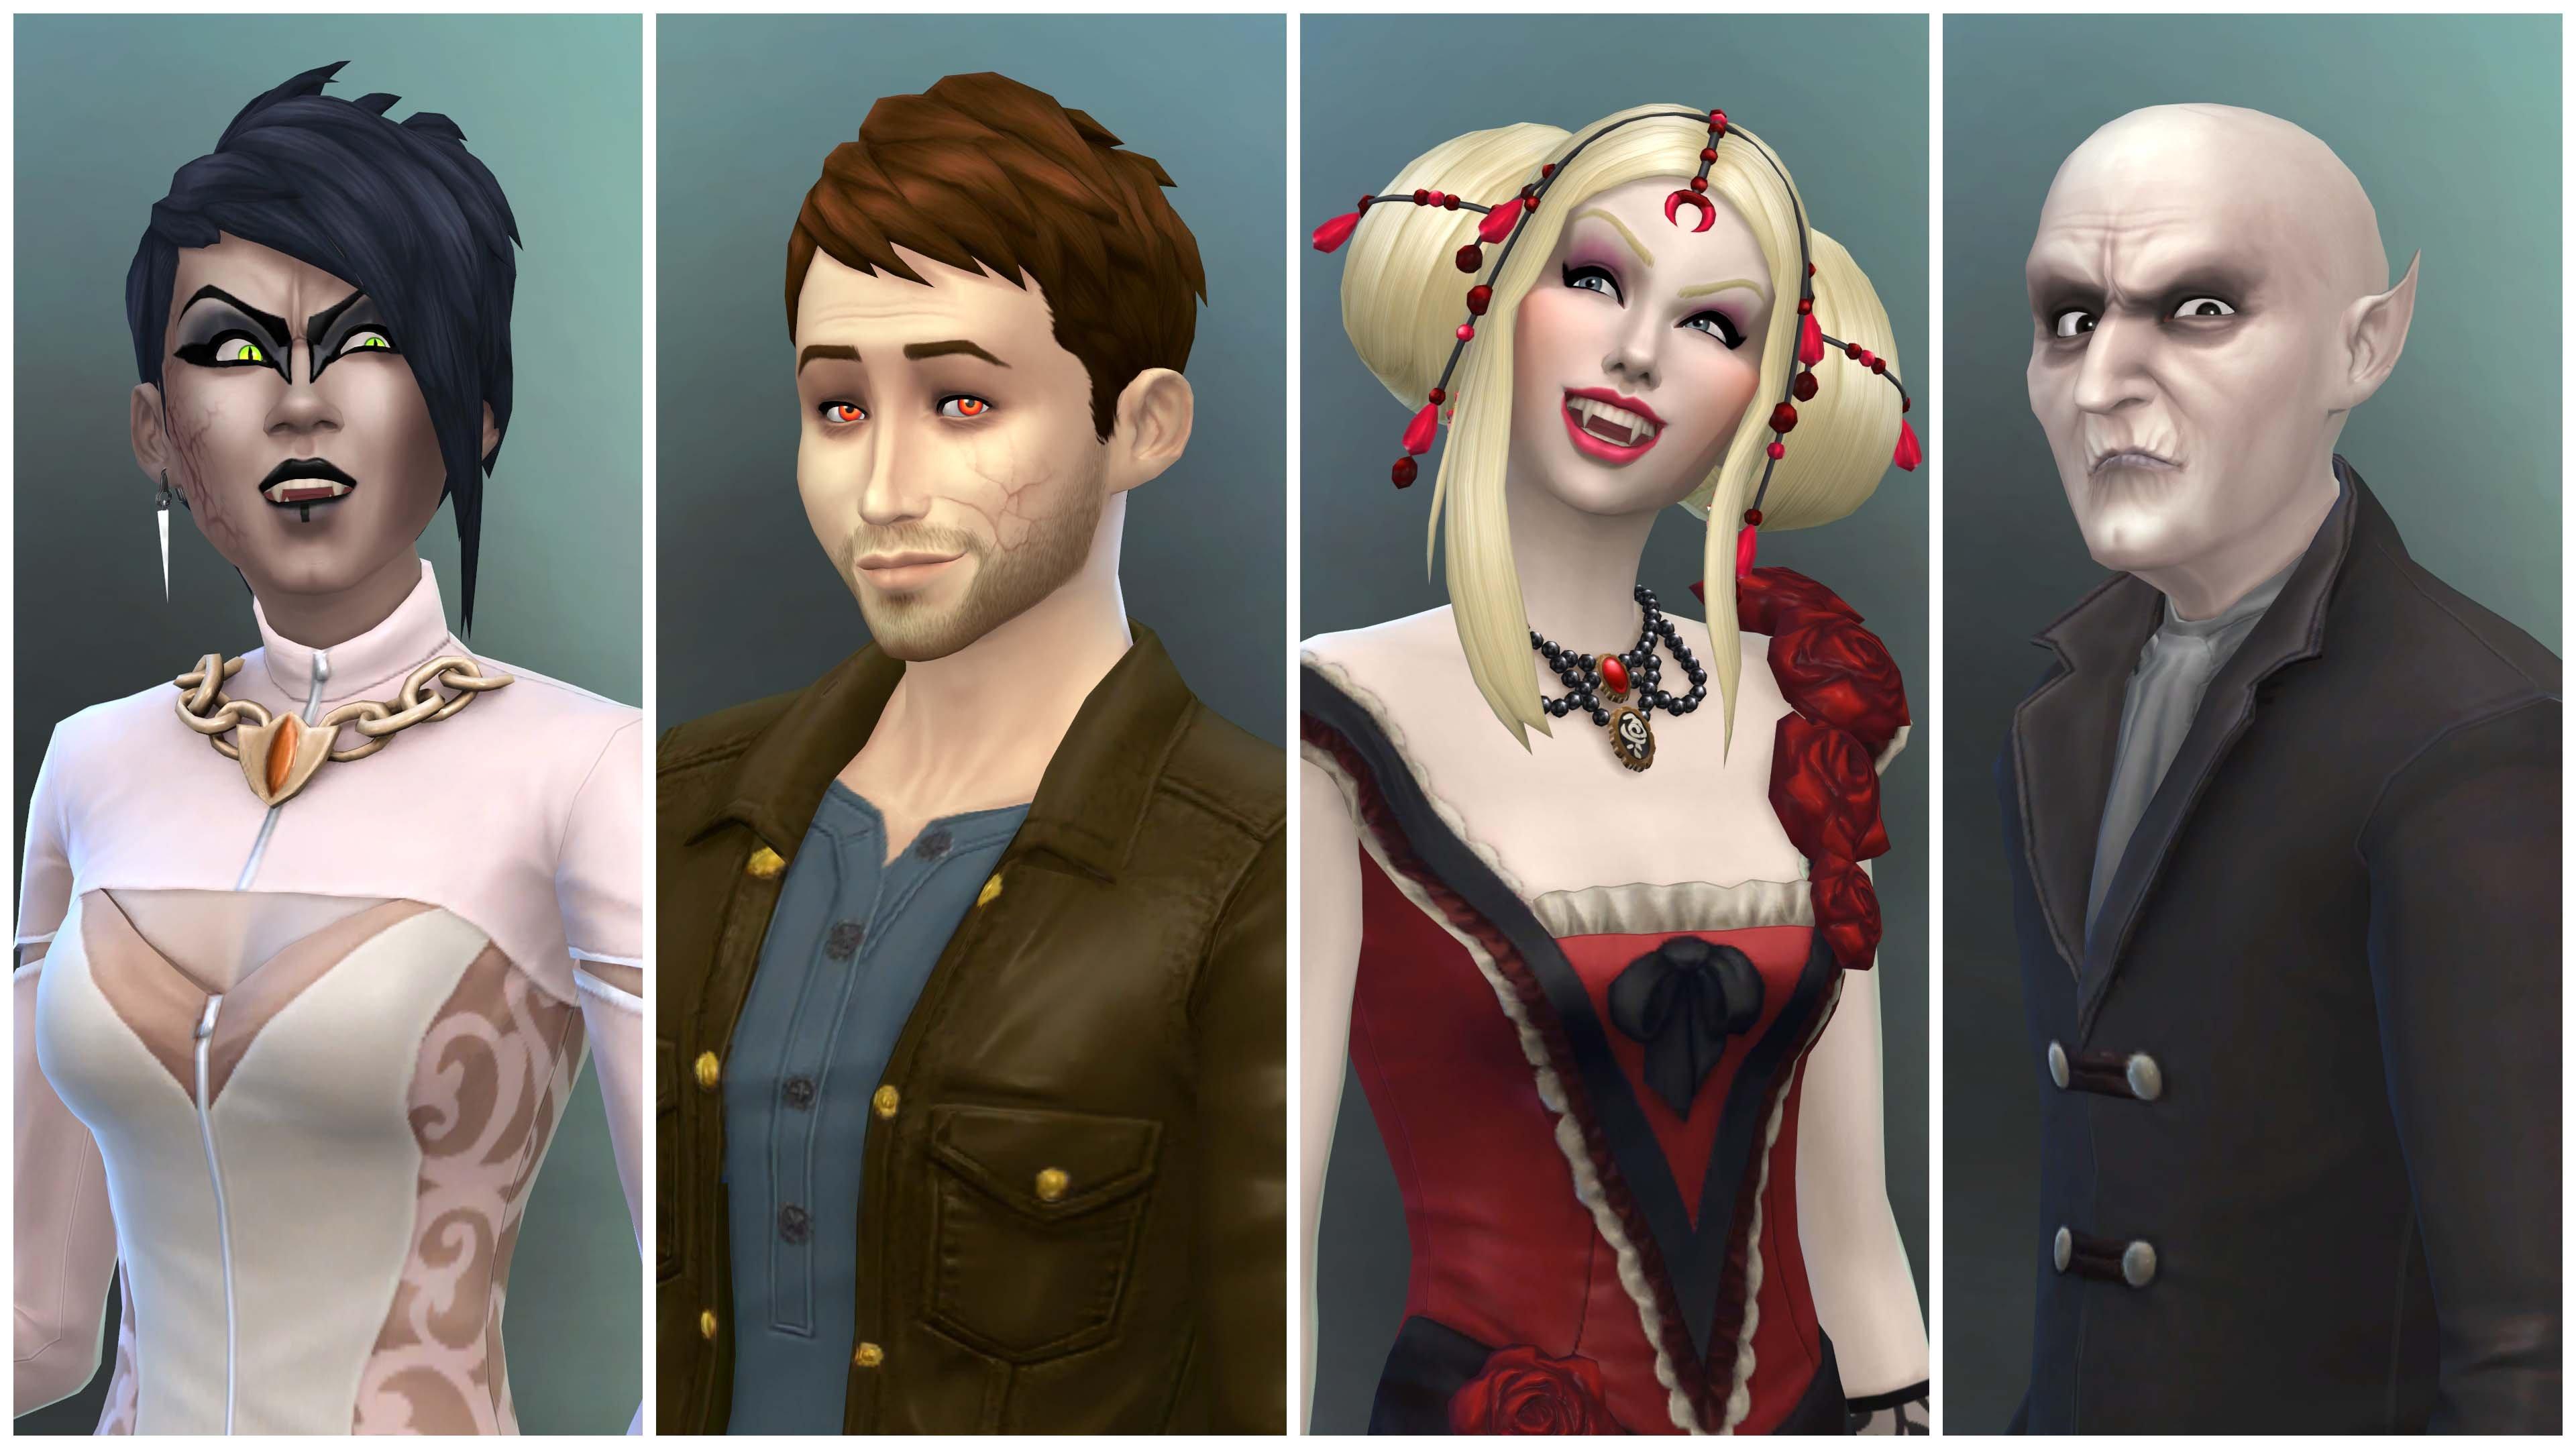 The Sims 4 Vampires Game Pack Download Free PC DLC